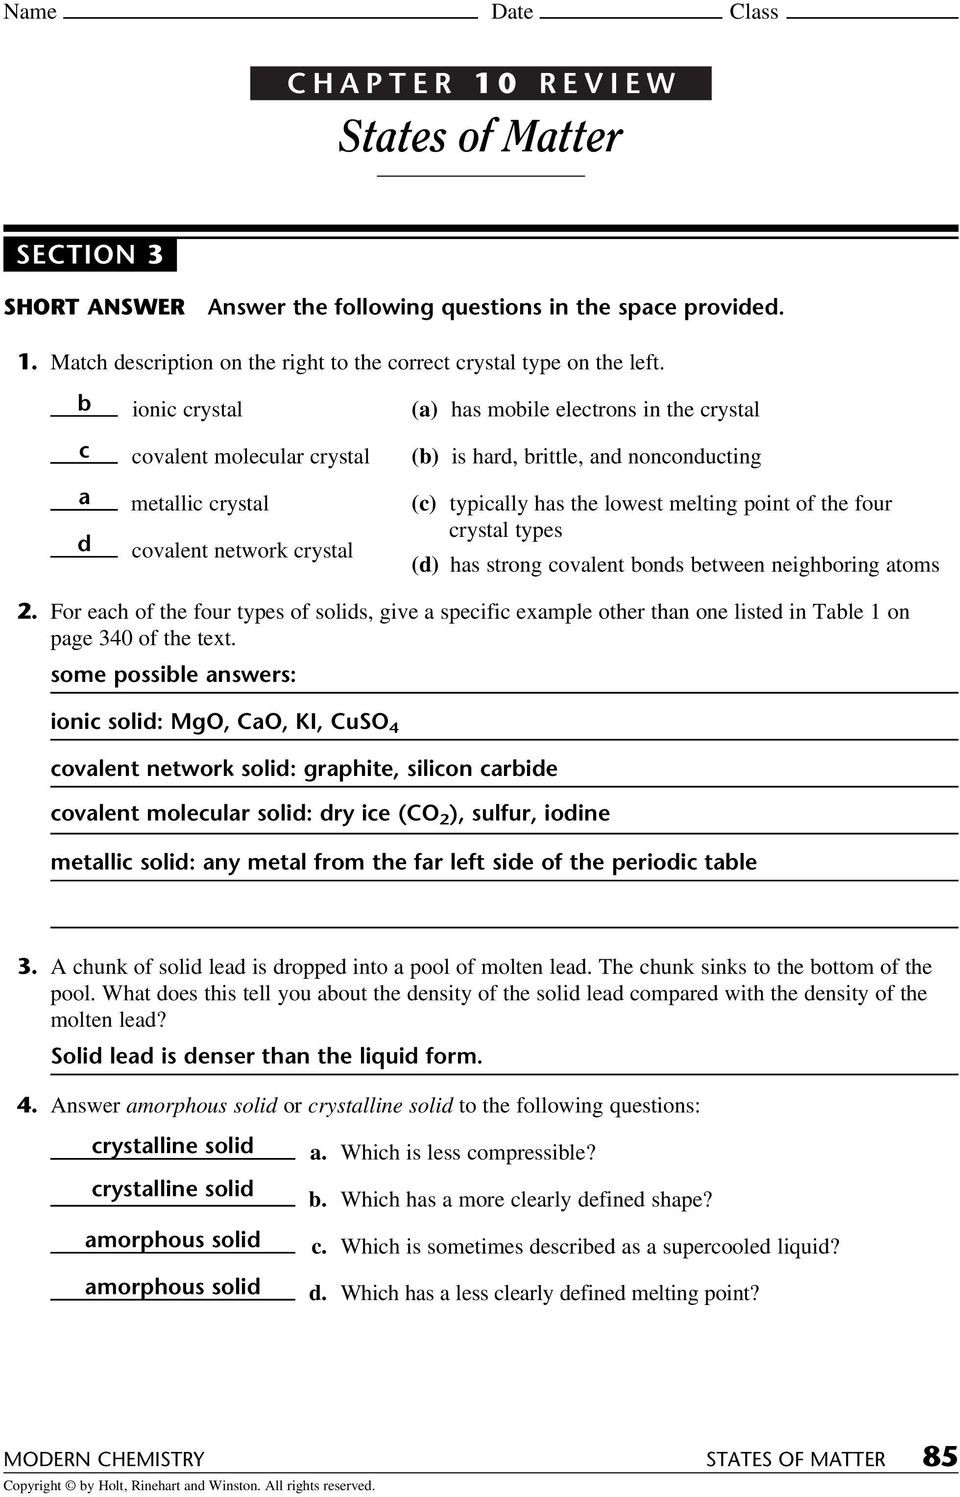 States Of Matter Worksheet Chemistry States Of Matter Chapter 10 Review Section 1 Name Date